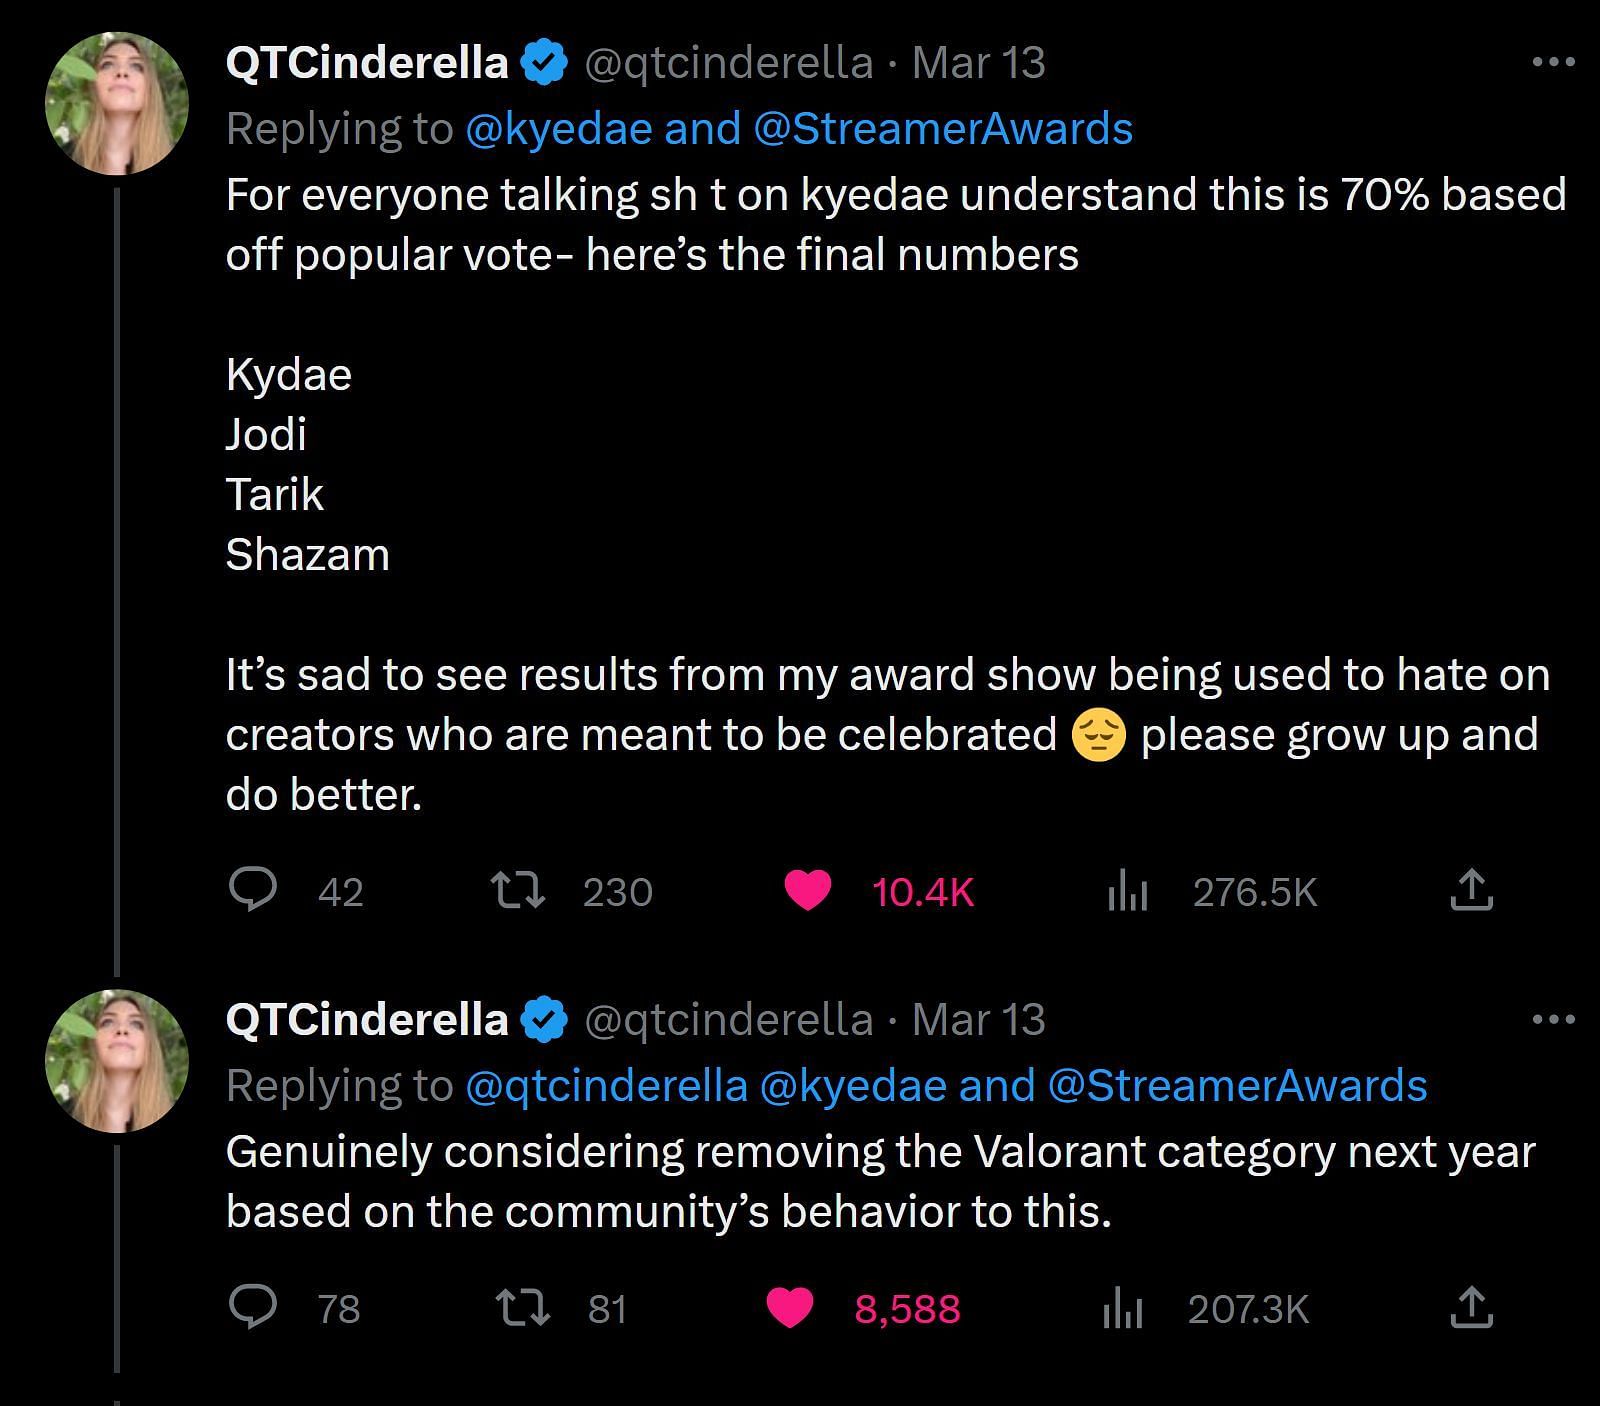 QTCinderella Decides to Take Break From Internet Due to Wave of Hate -  Drama Alert